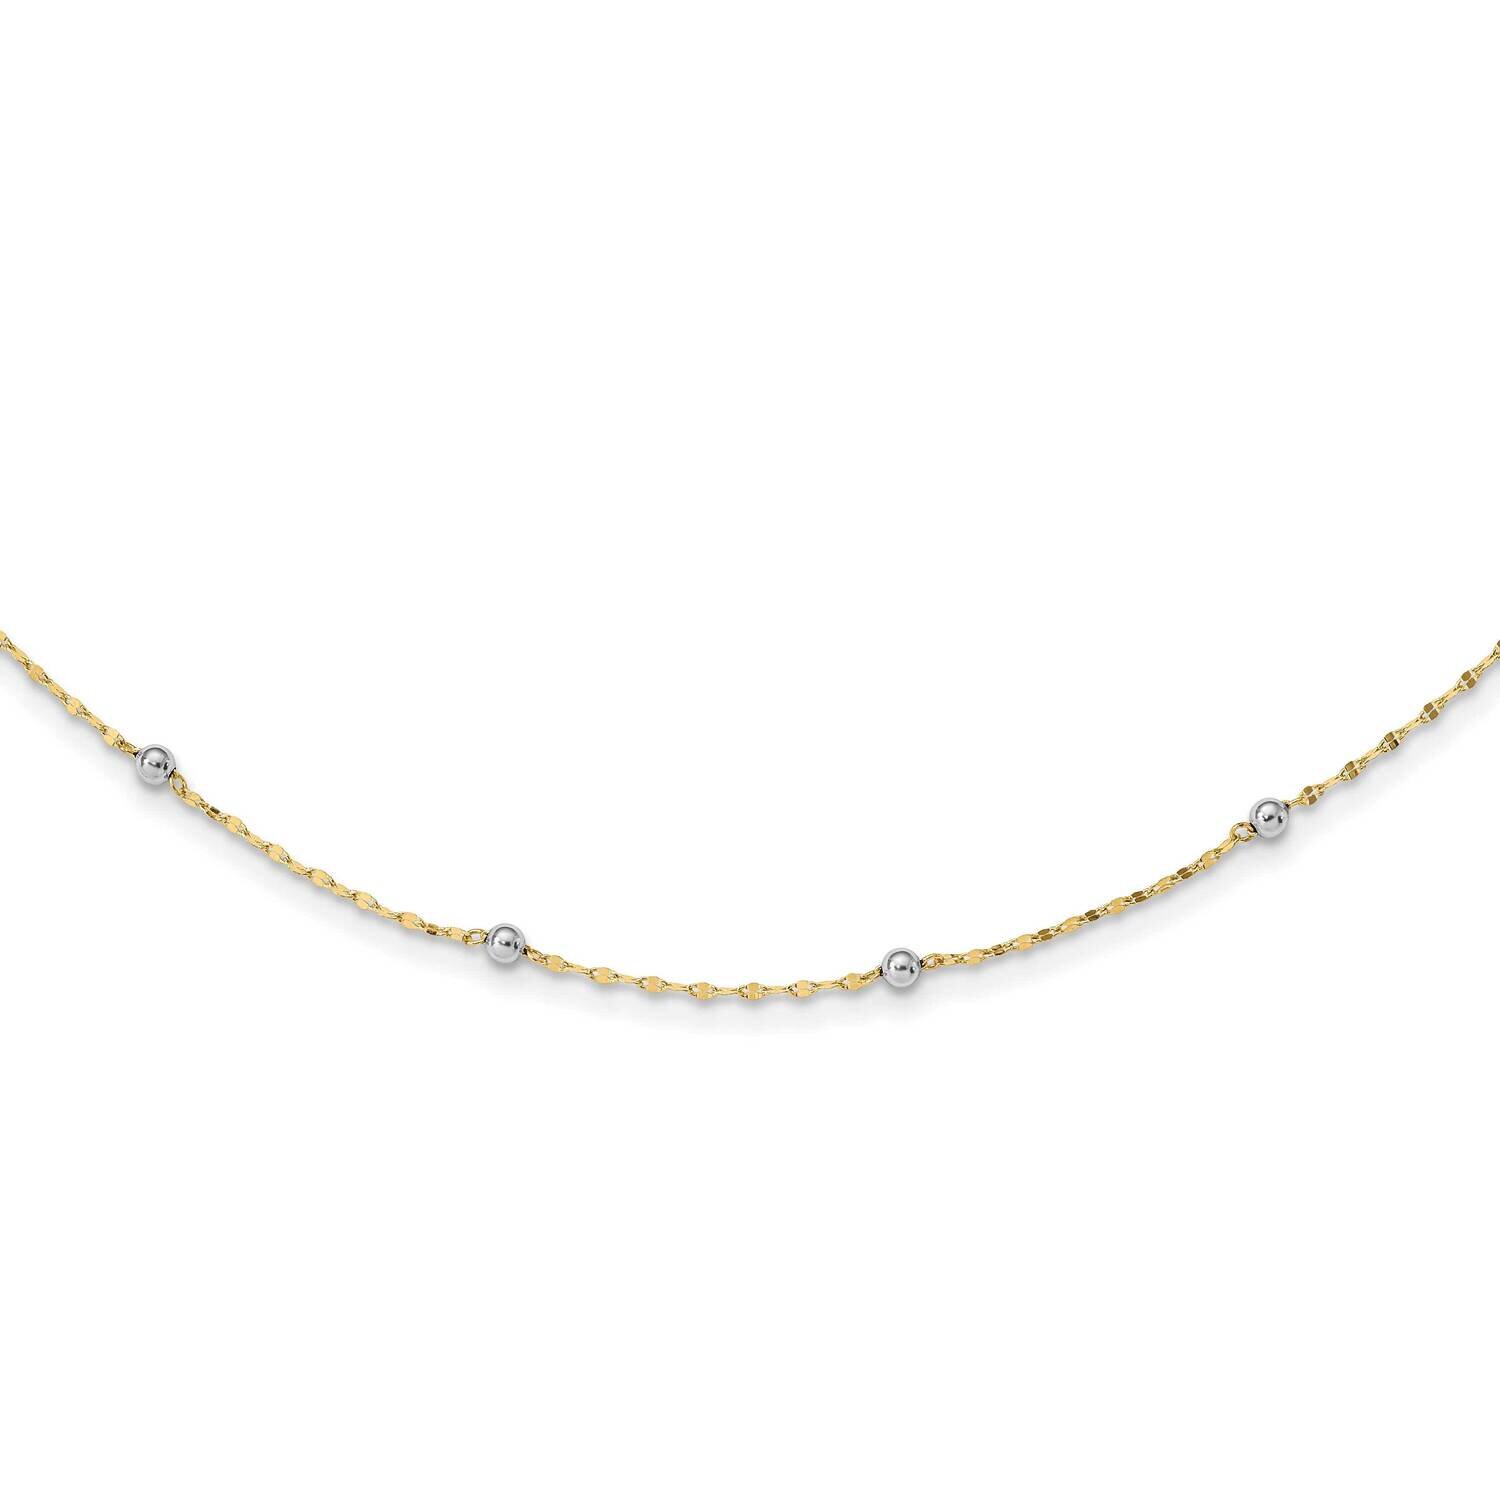 Polished Bead Fancy Necklace 17 Inch 14k Two-Tone Gold SF2862-17